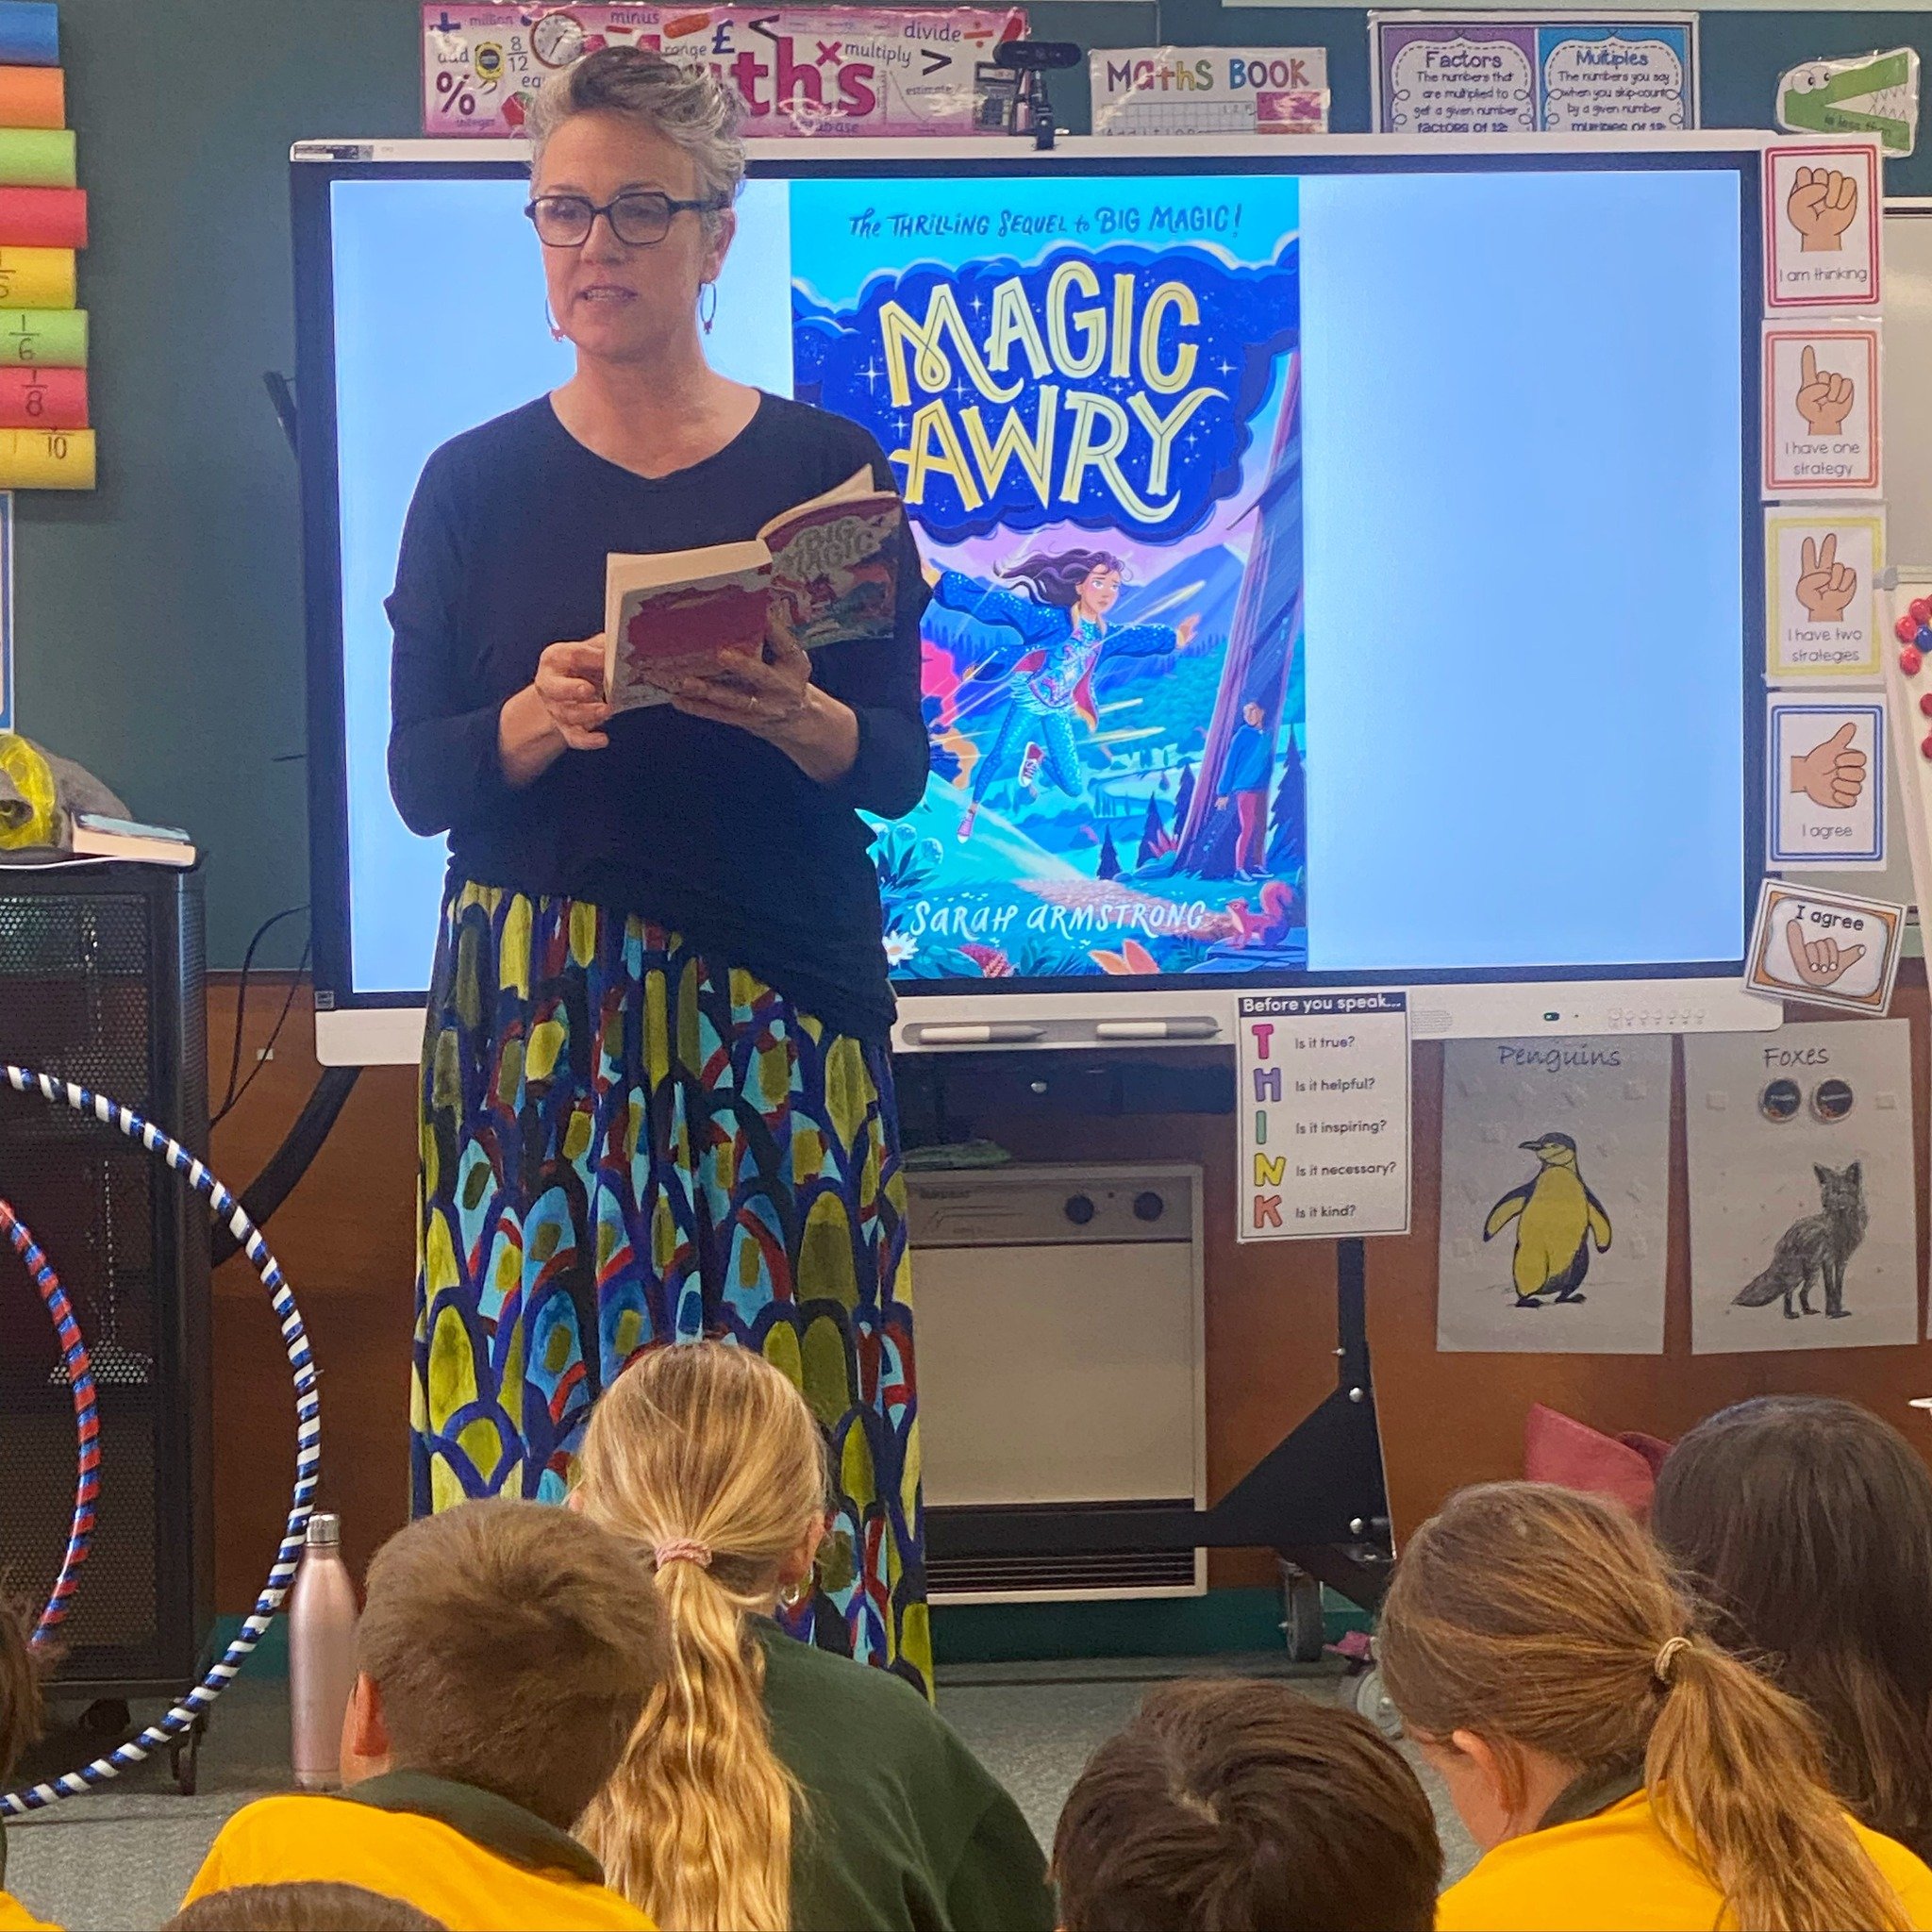 Today, these amazing kids and I wrote a story about a guy called Peanut who had a huge, magnificent nose and was widely celebrated, until&hellip;. a girl called Cashew came along with an even mightier nose. 

I love visiting schools and working with 